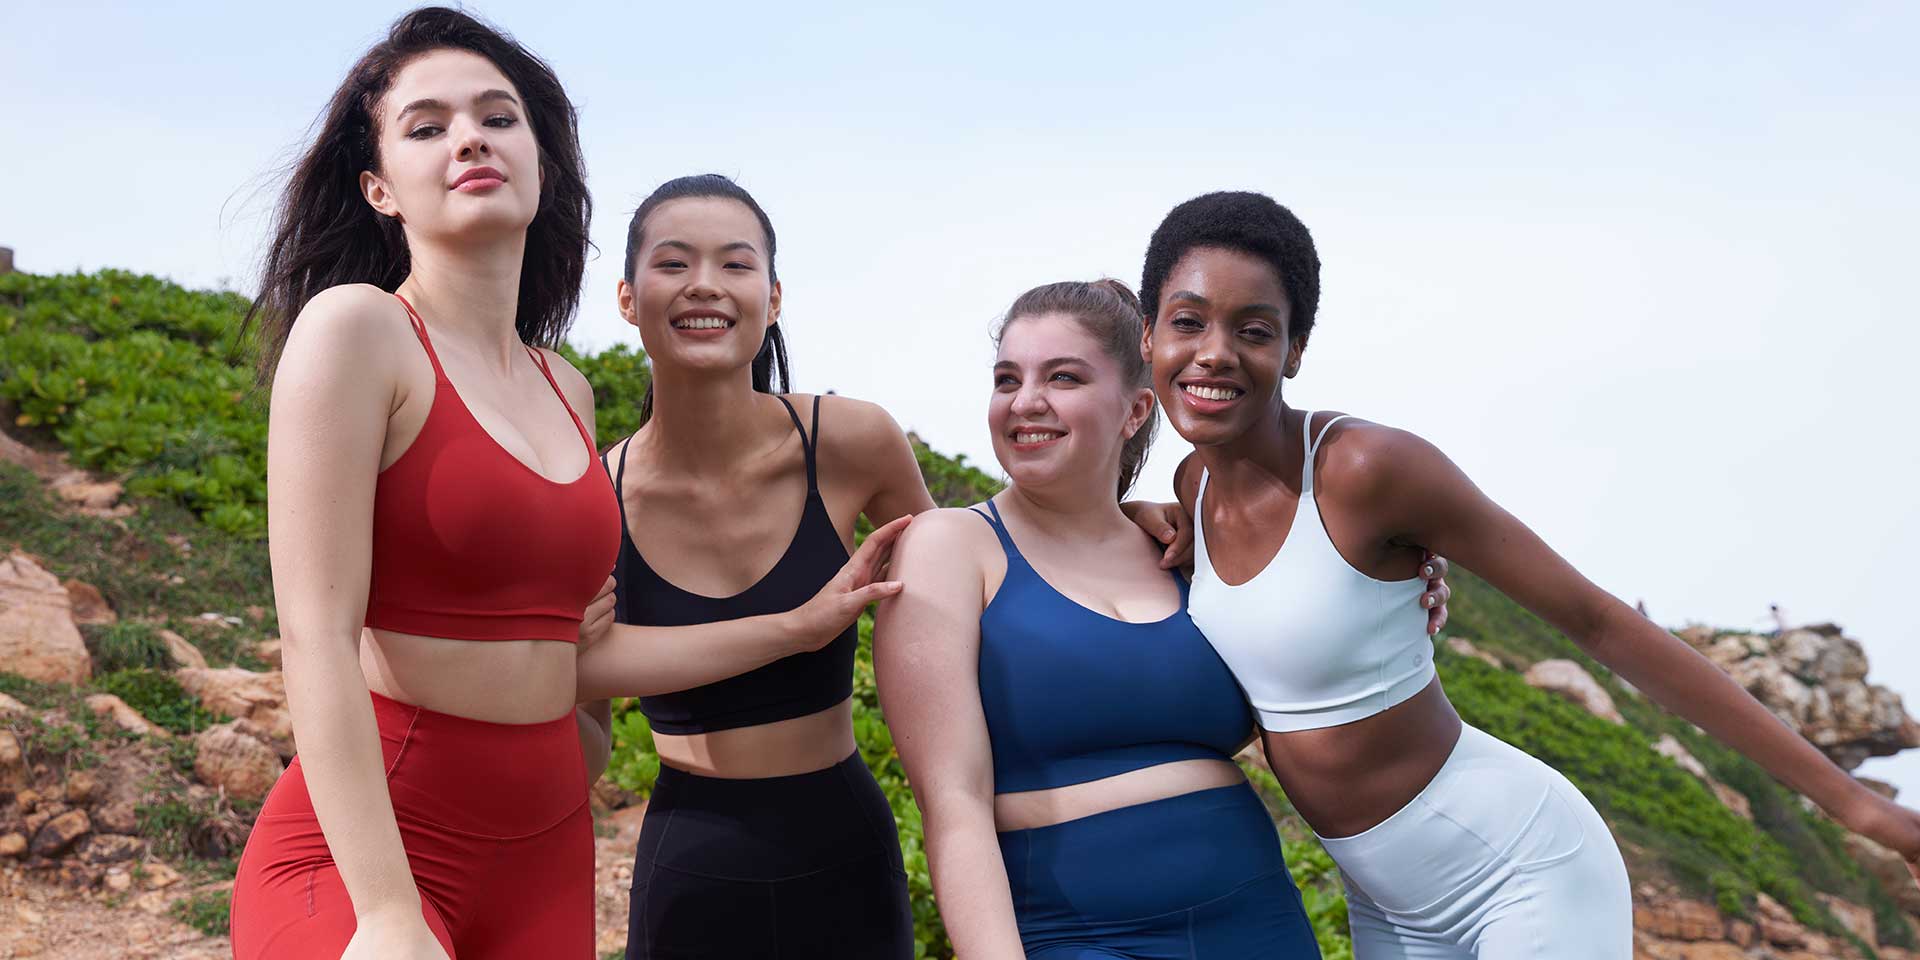 I road tested a bunch of sports bras to find the perfect fit for my G+ boobs